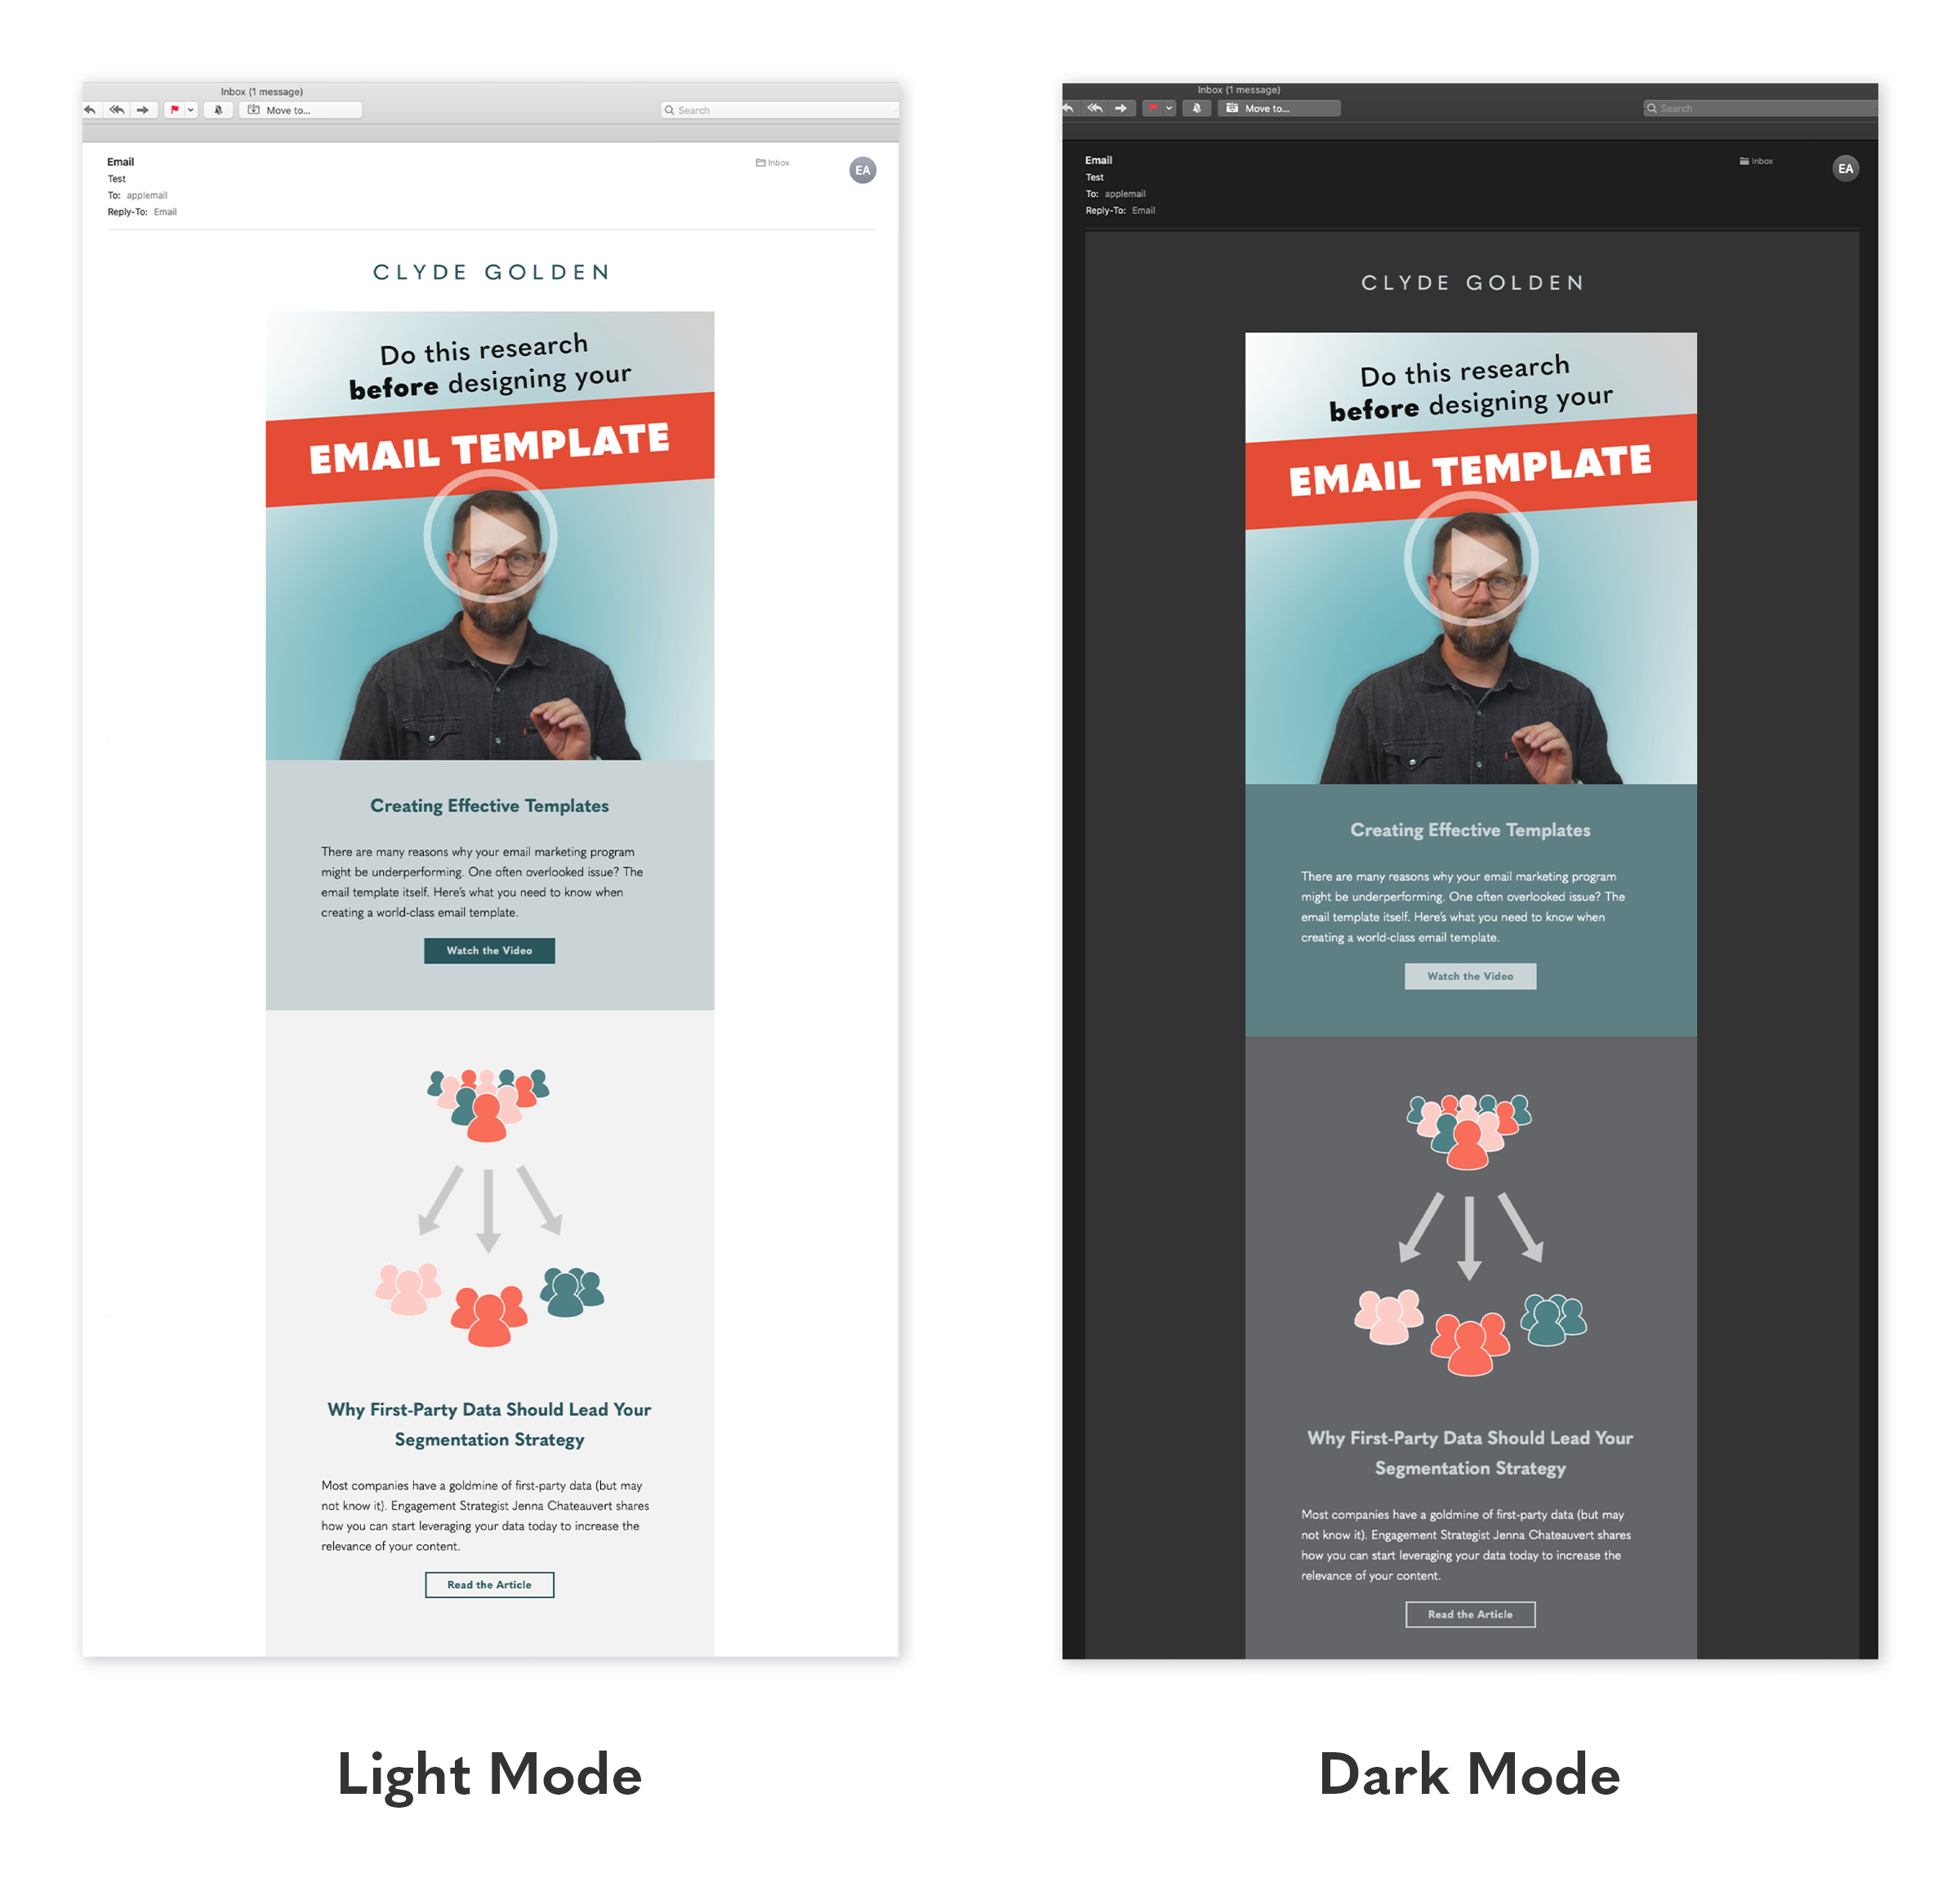 The Developer's Guide to Dark Mode in Email